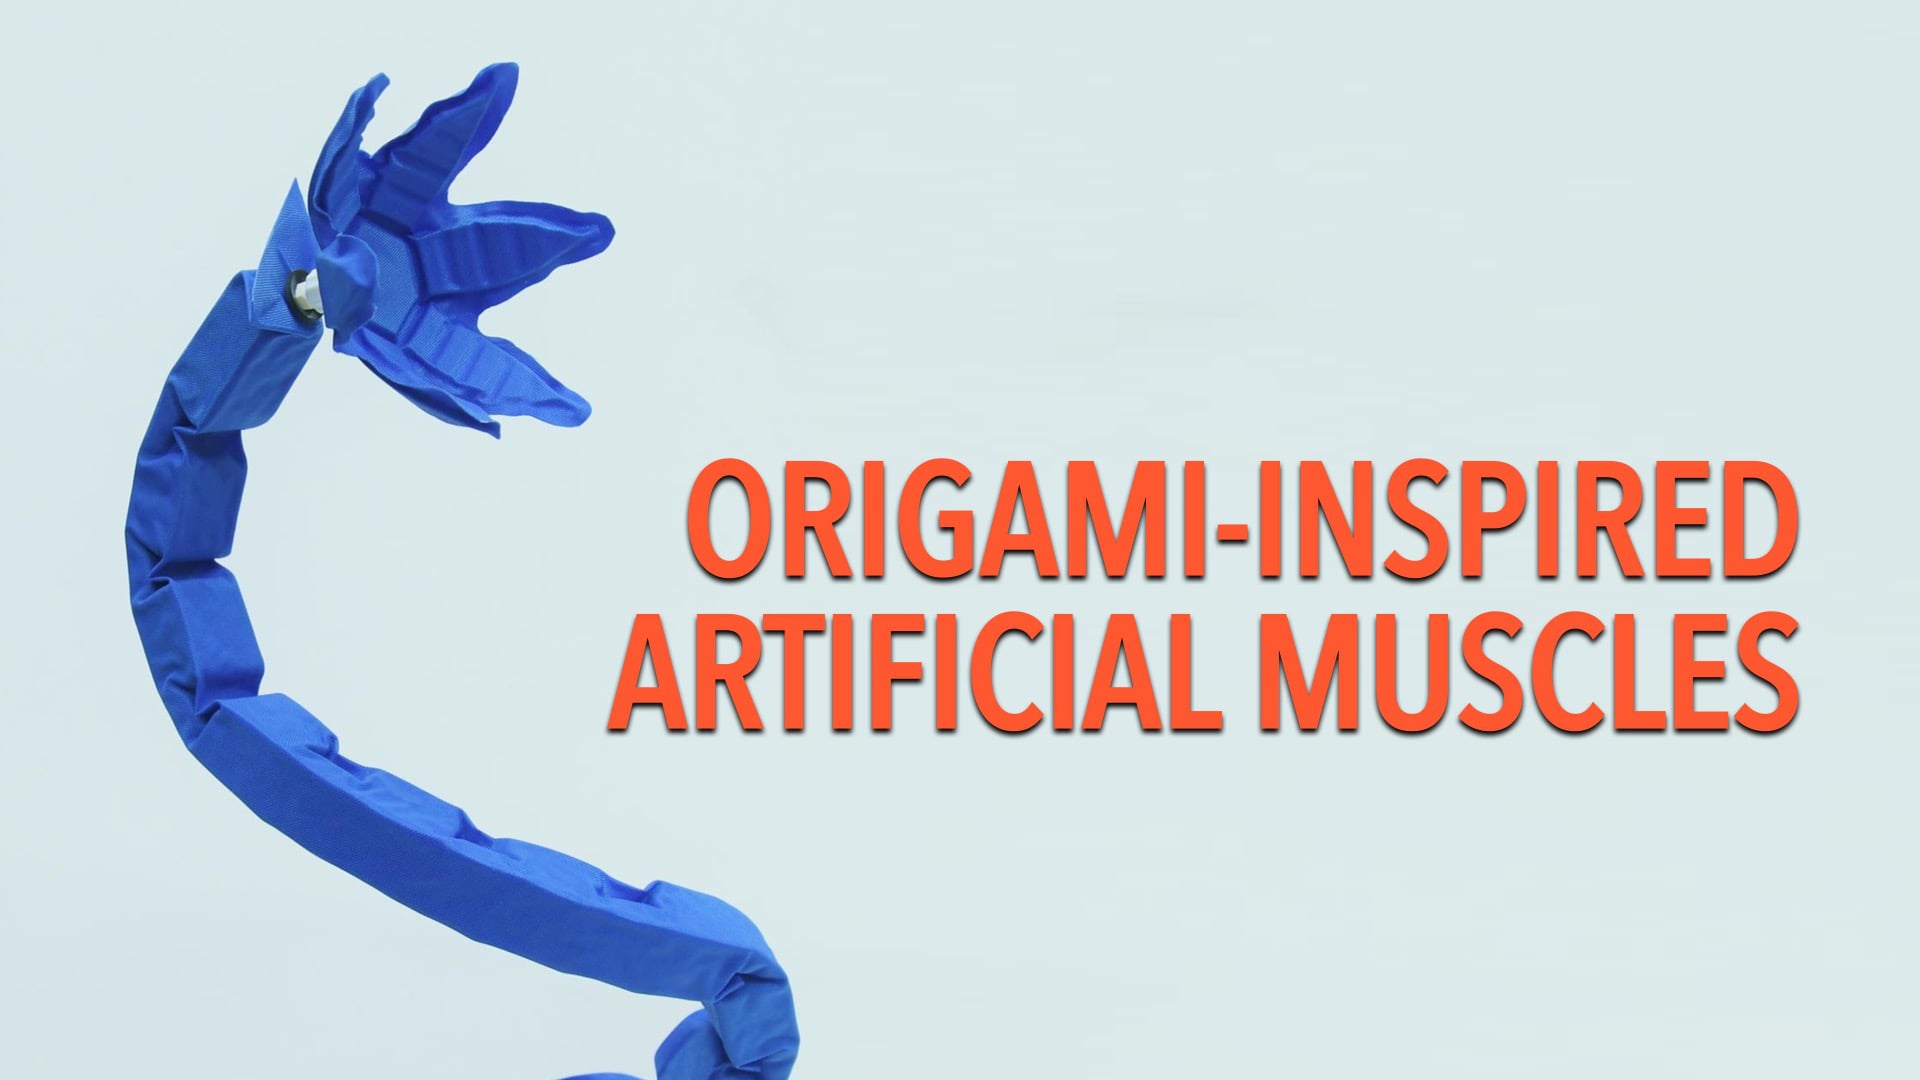 Origami-Inspired Artificial Muscles